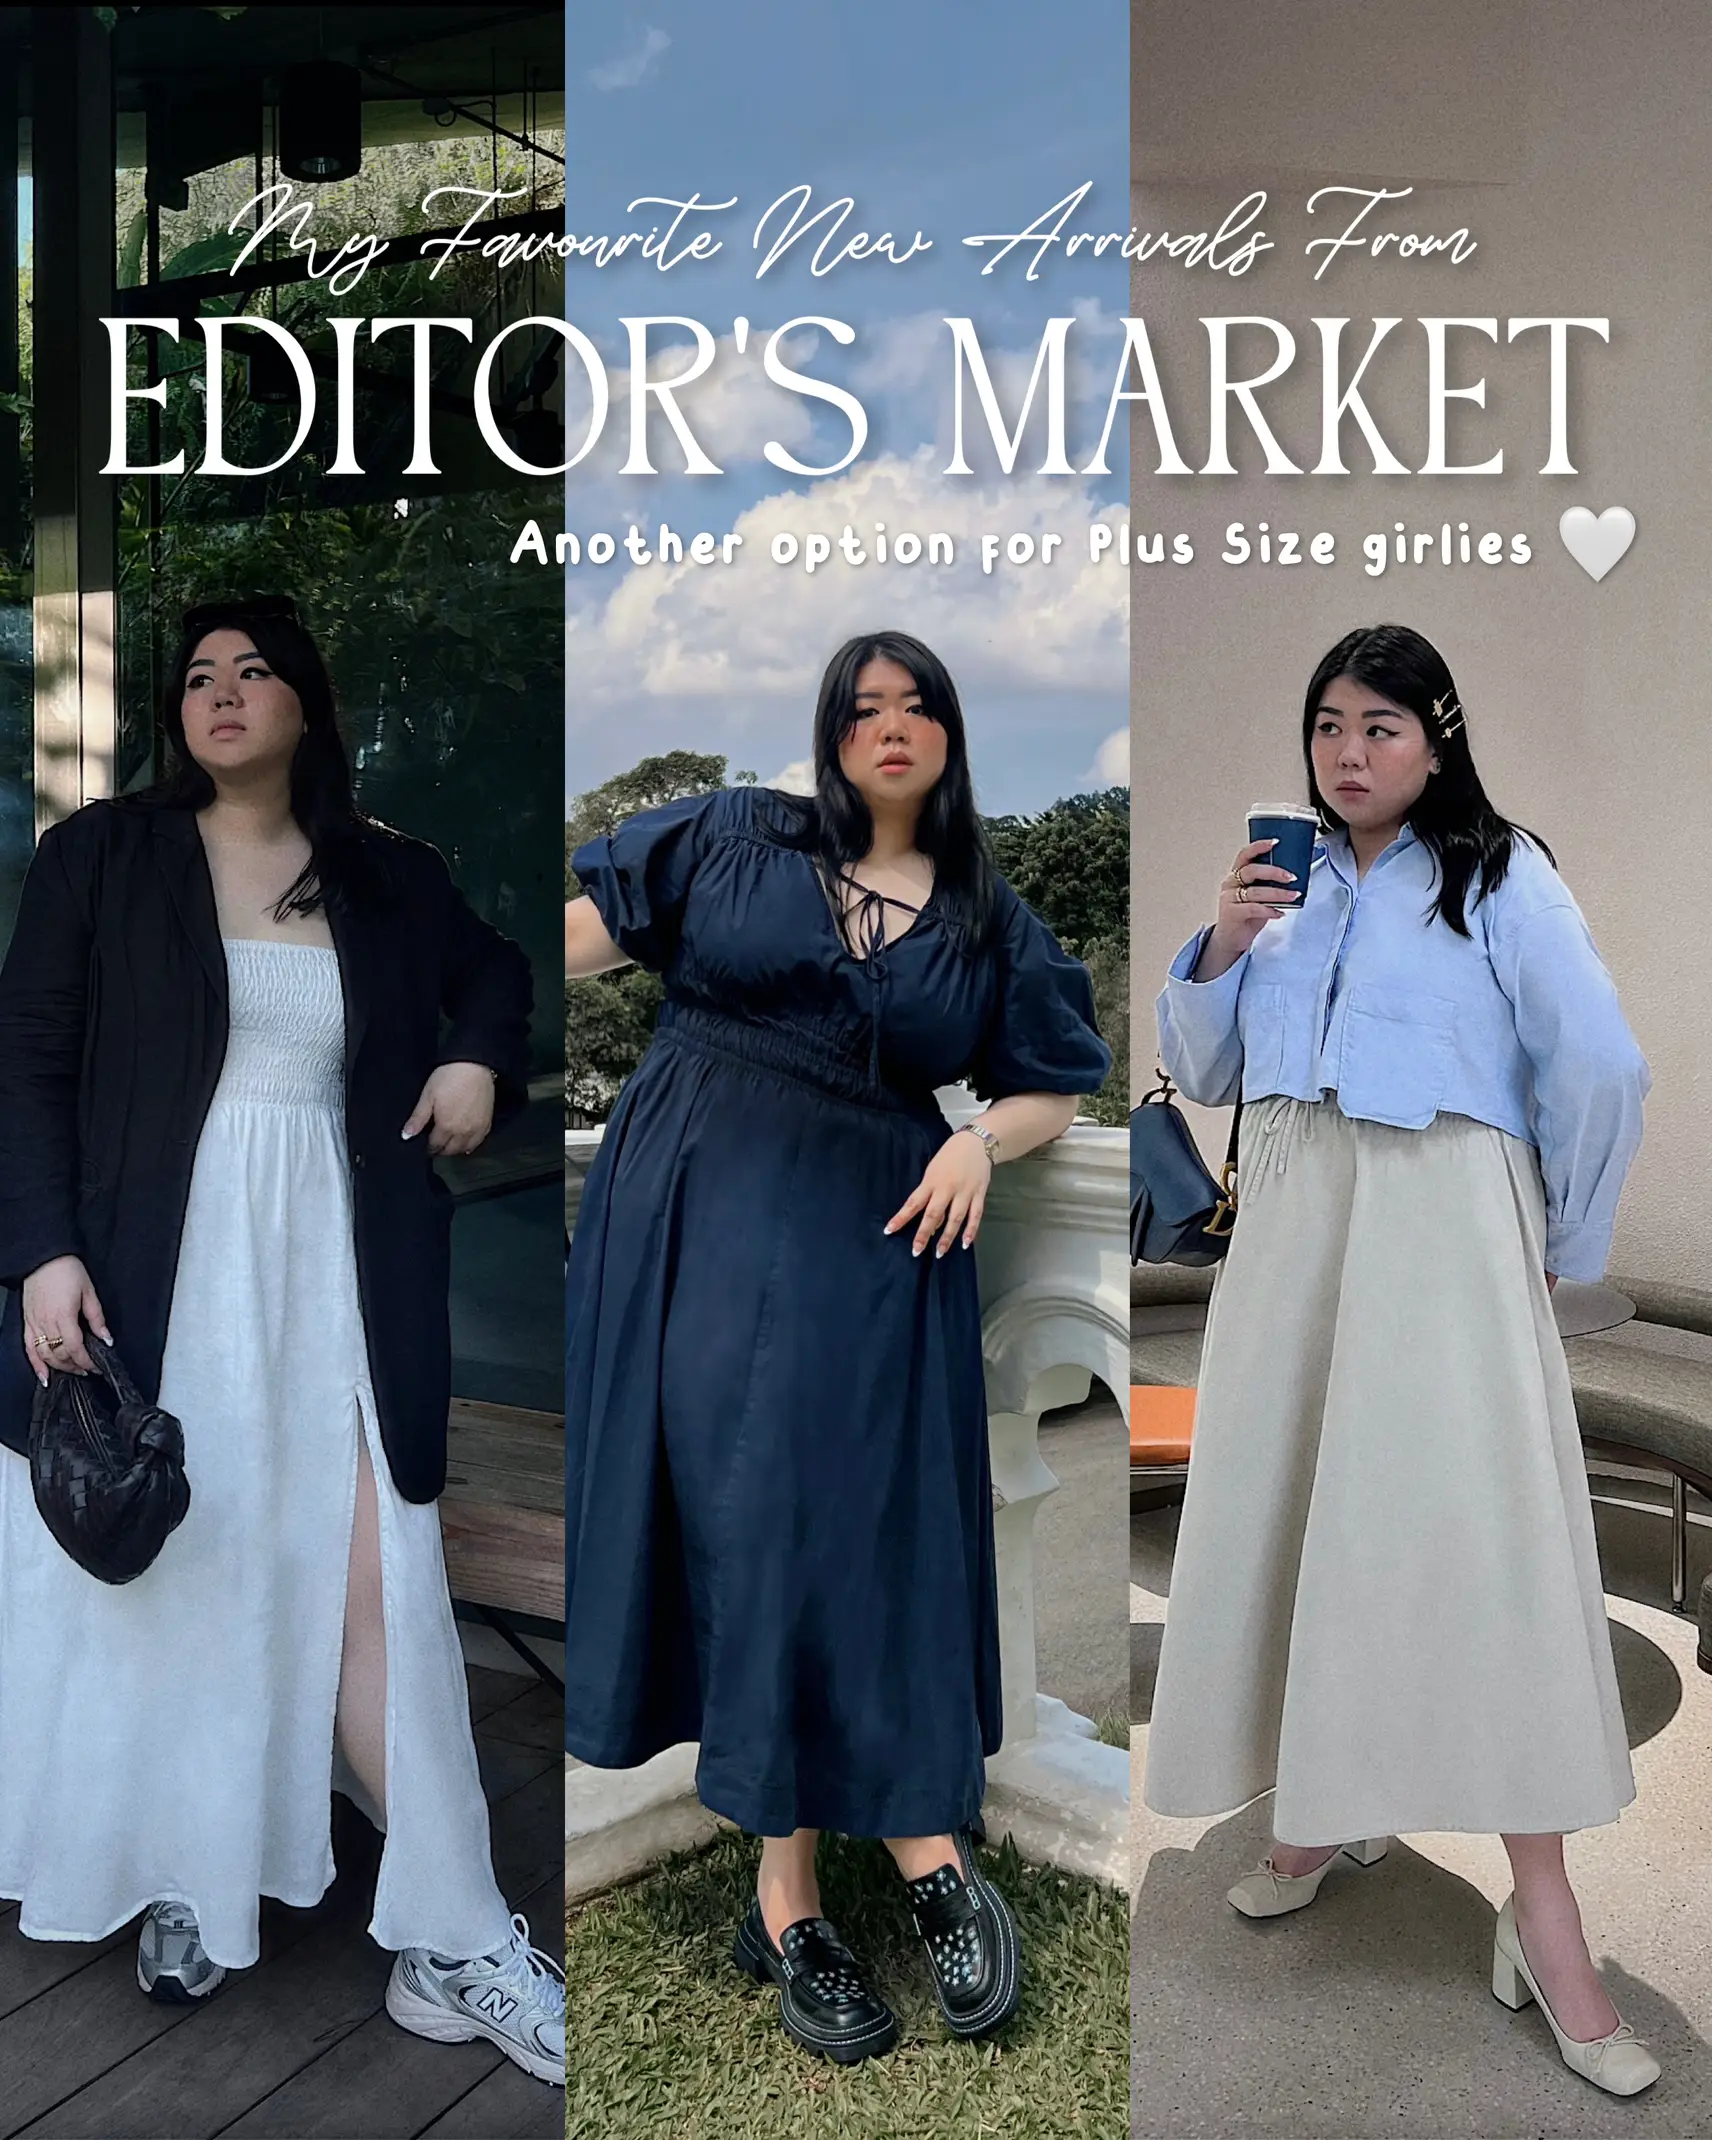 New Arrivals fm Editor’s Mkt fits Plus Girlies! ✨🫶🏻's images